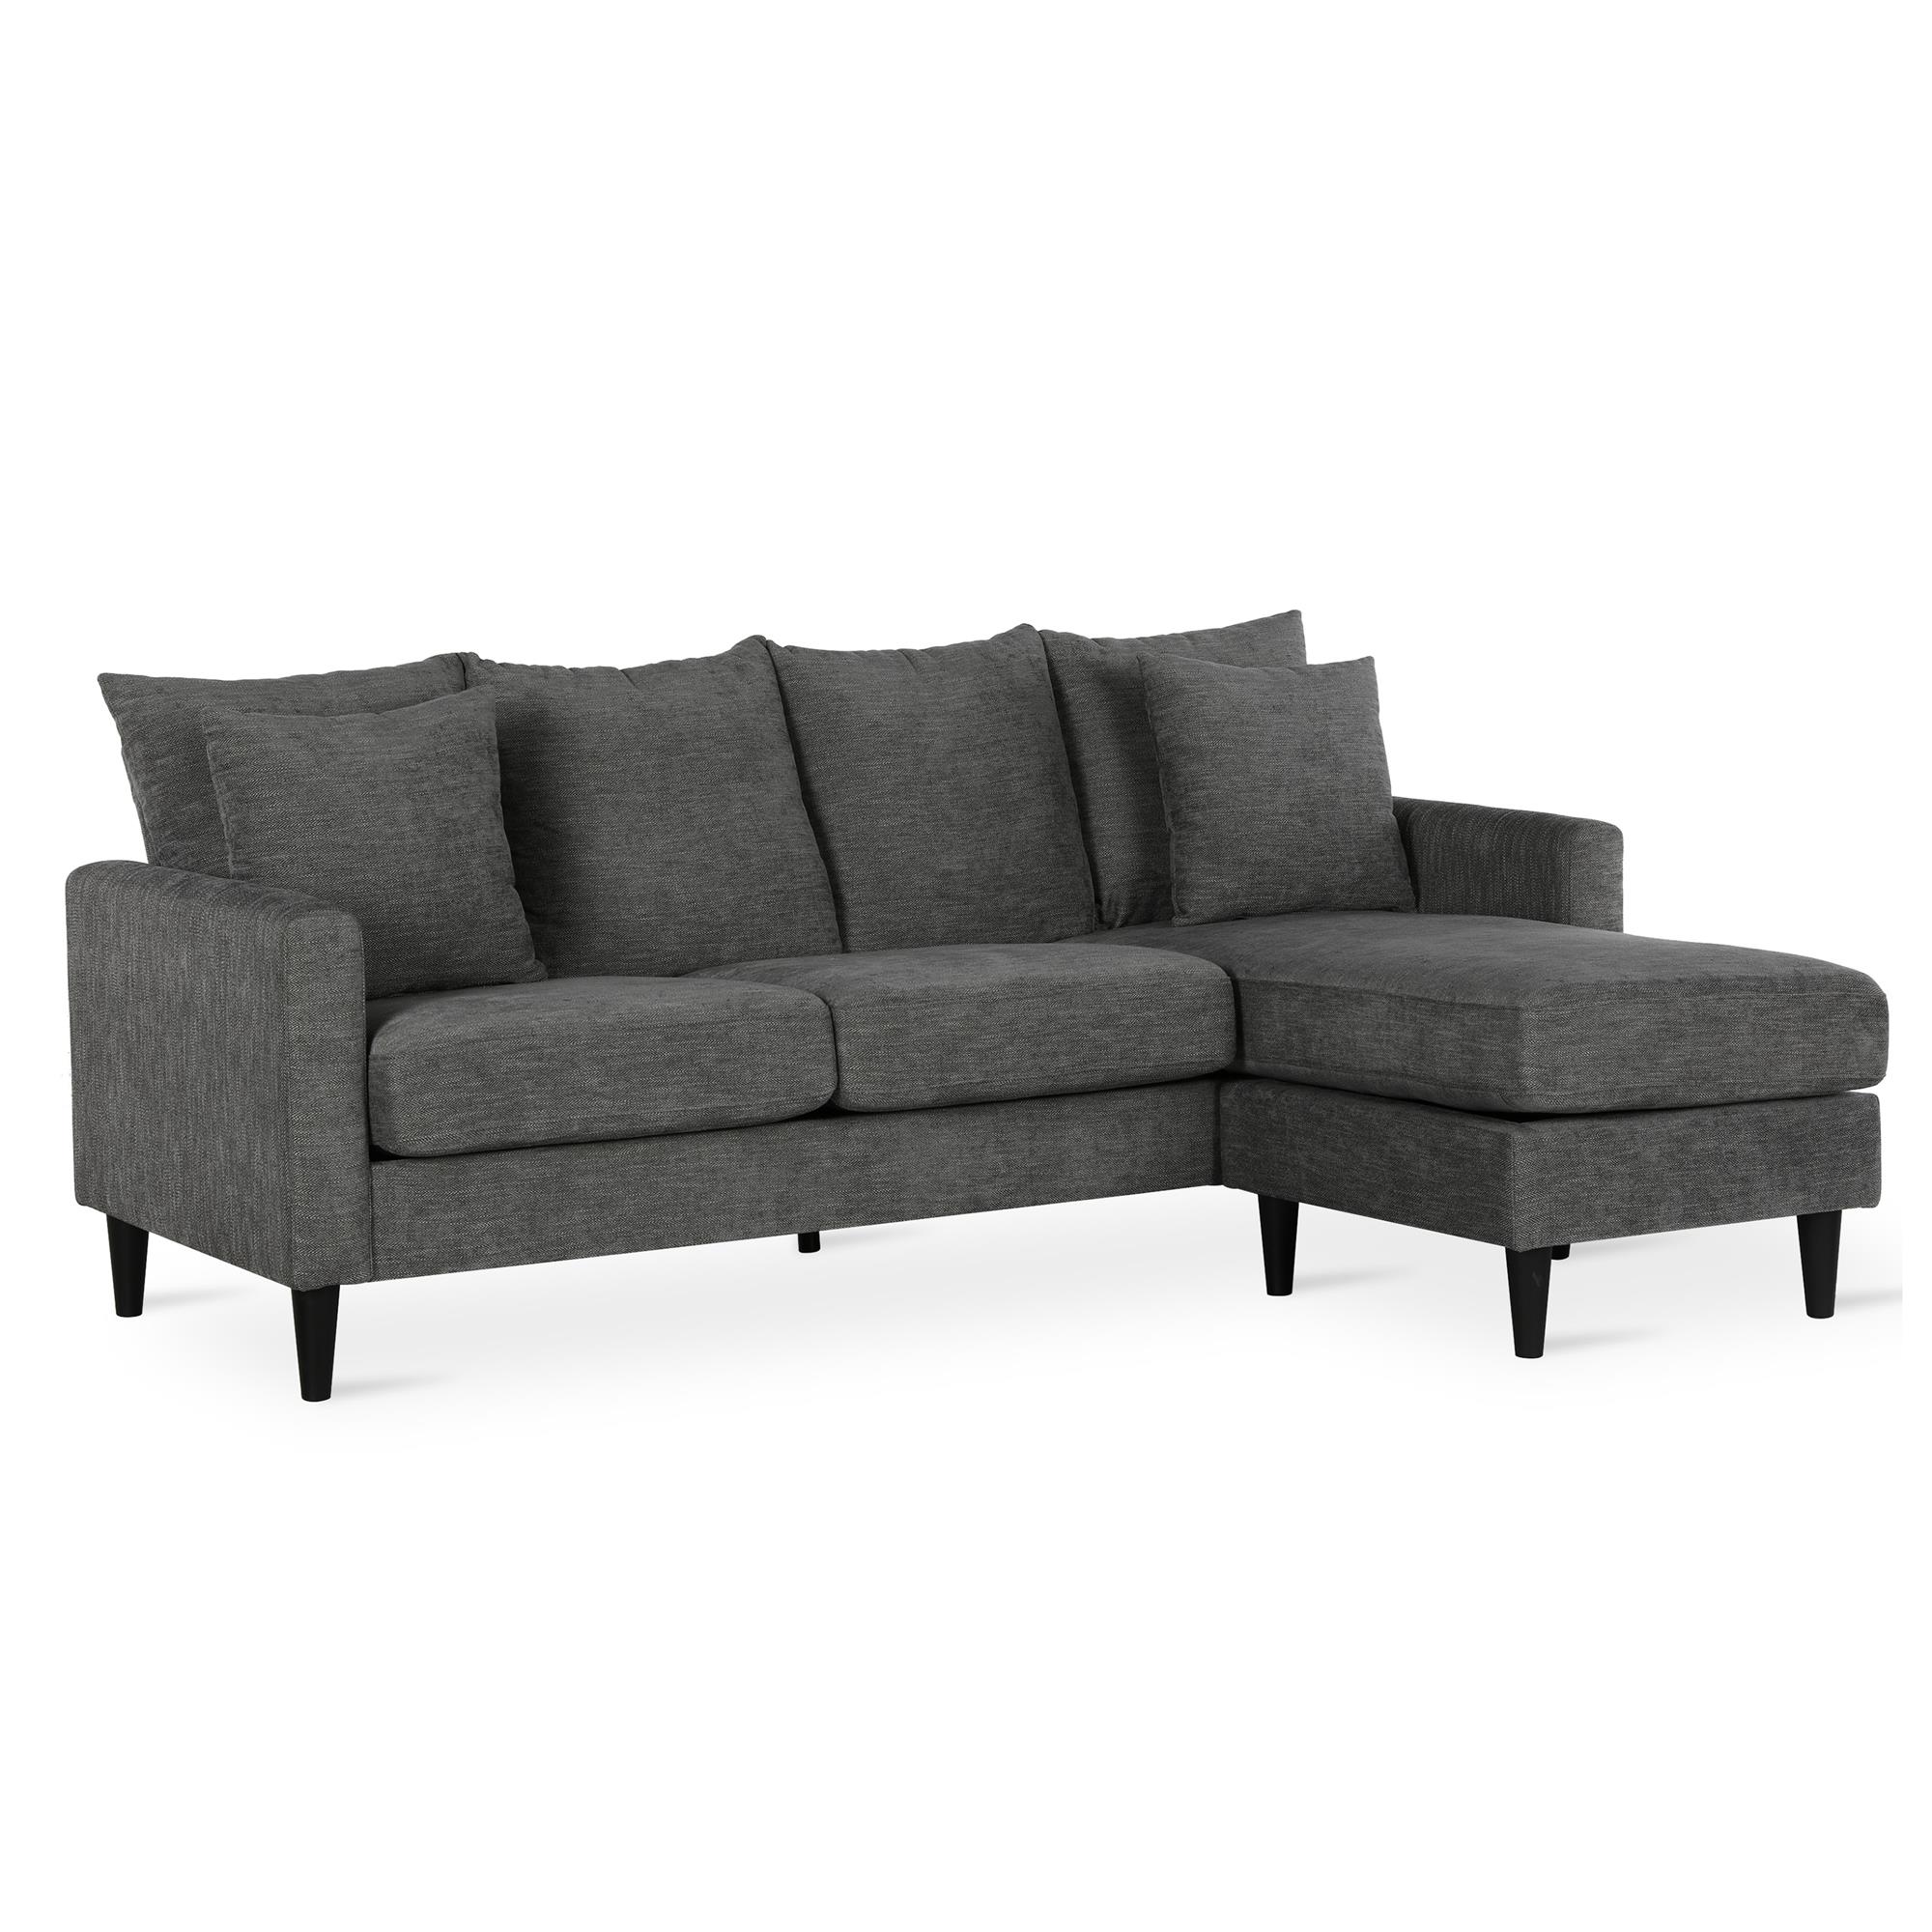 DHP Keaton Reversible Sectional with Pillows, Gray - image 1 of 14